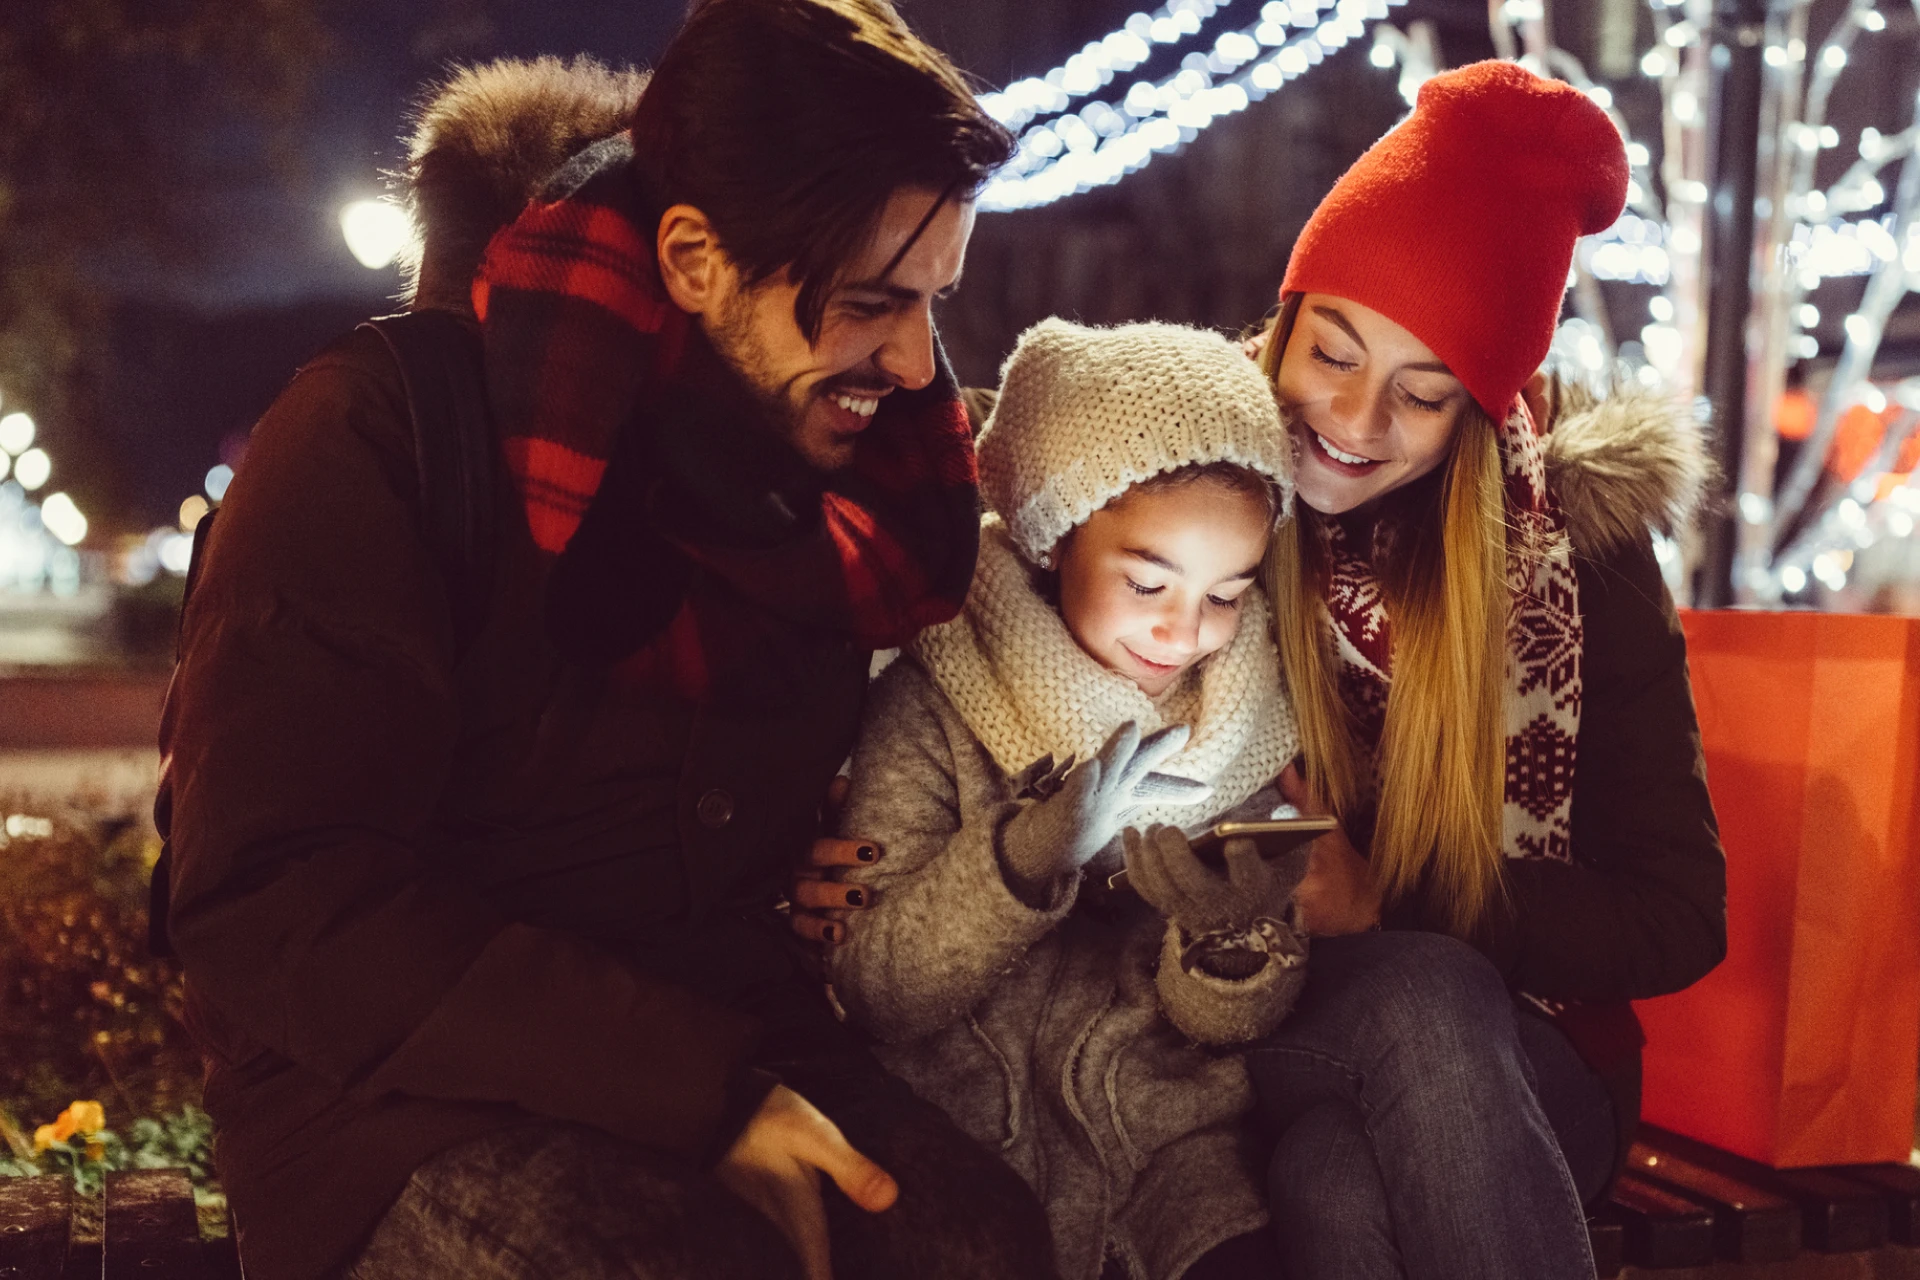 Two parents with daughter outside looking at mobile phone Greenlight app during the holiday winter